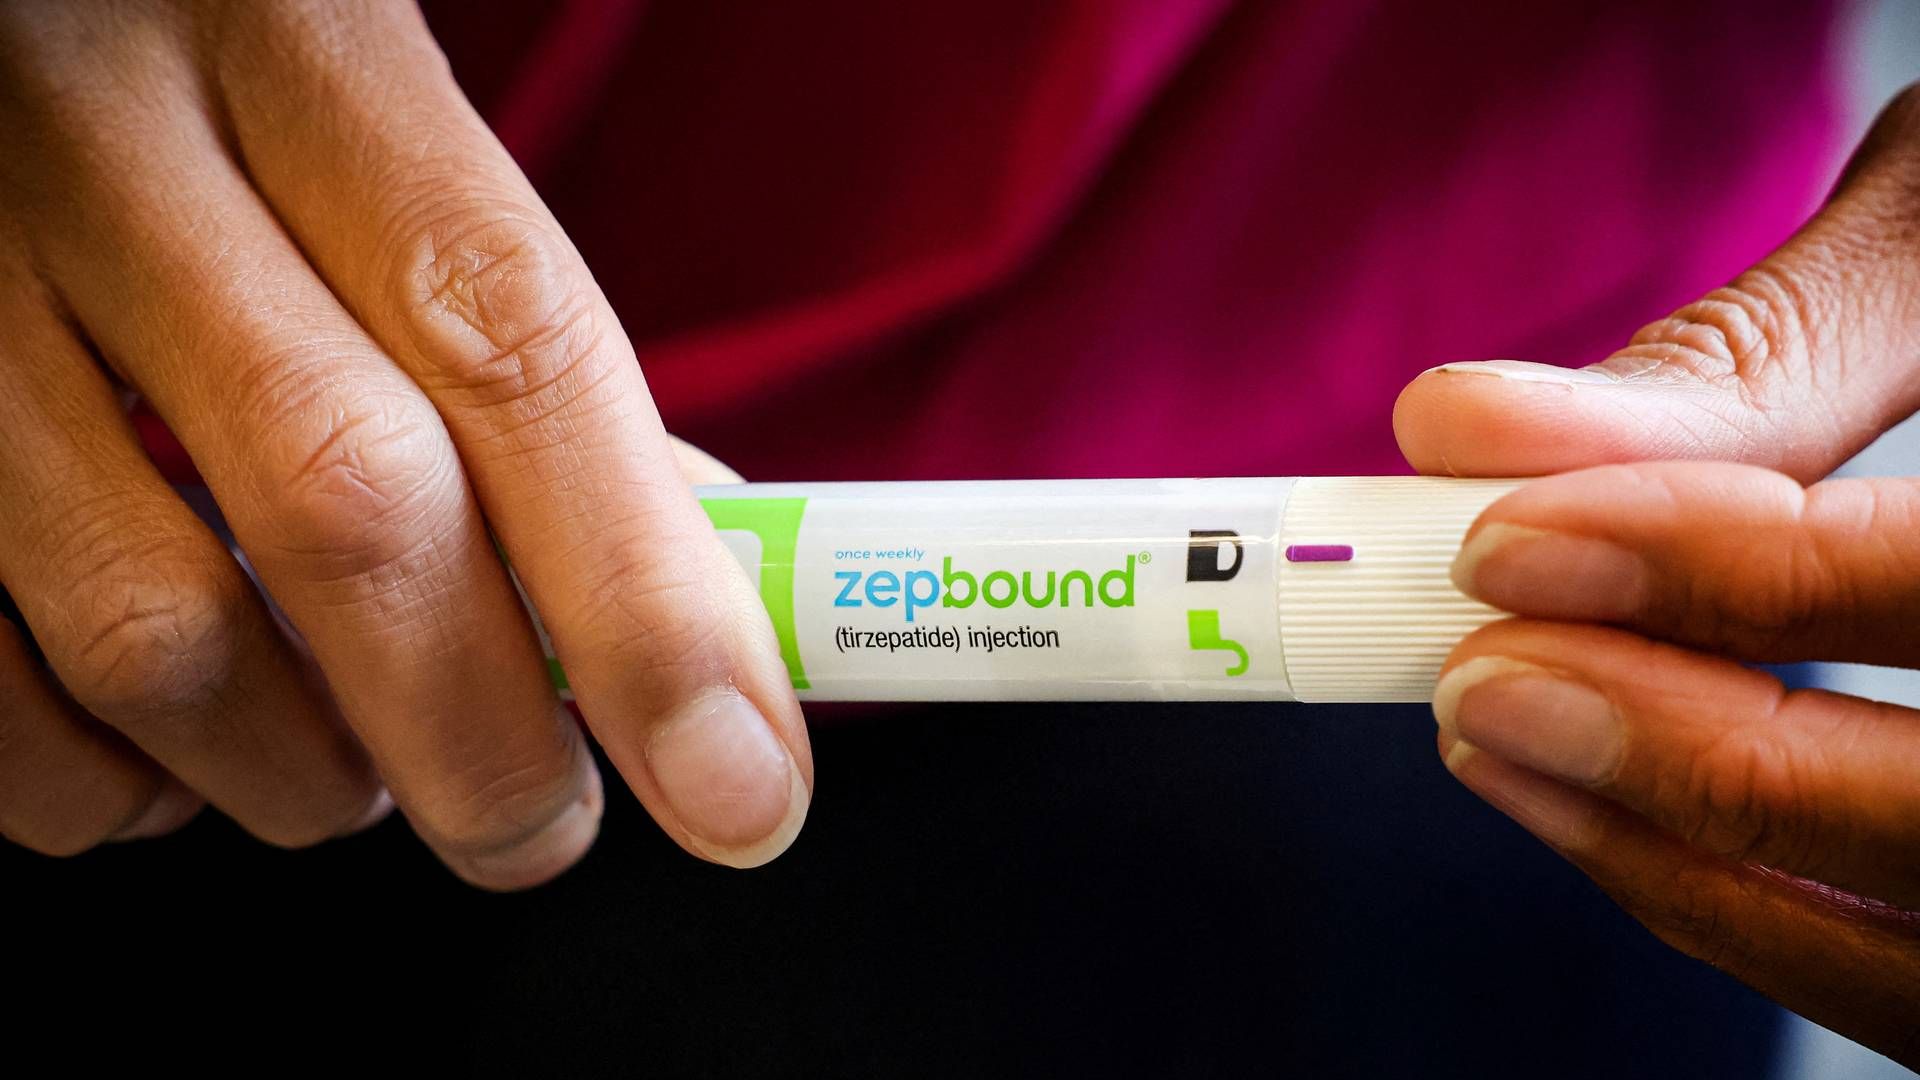 Eli Lilly's tirzepatide is sold in the US under the name Mounjaro for diabetes but under the brand name Zepbound for obesity. | Photo: Brendan Mcdermid